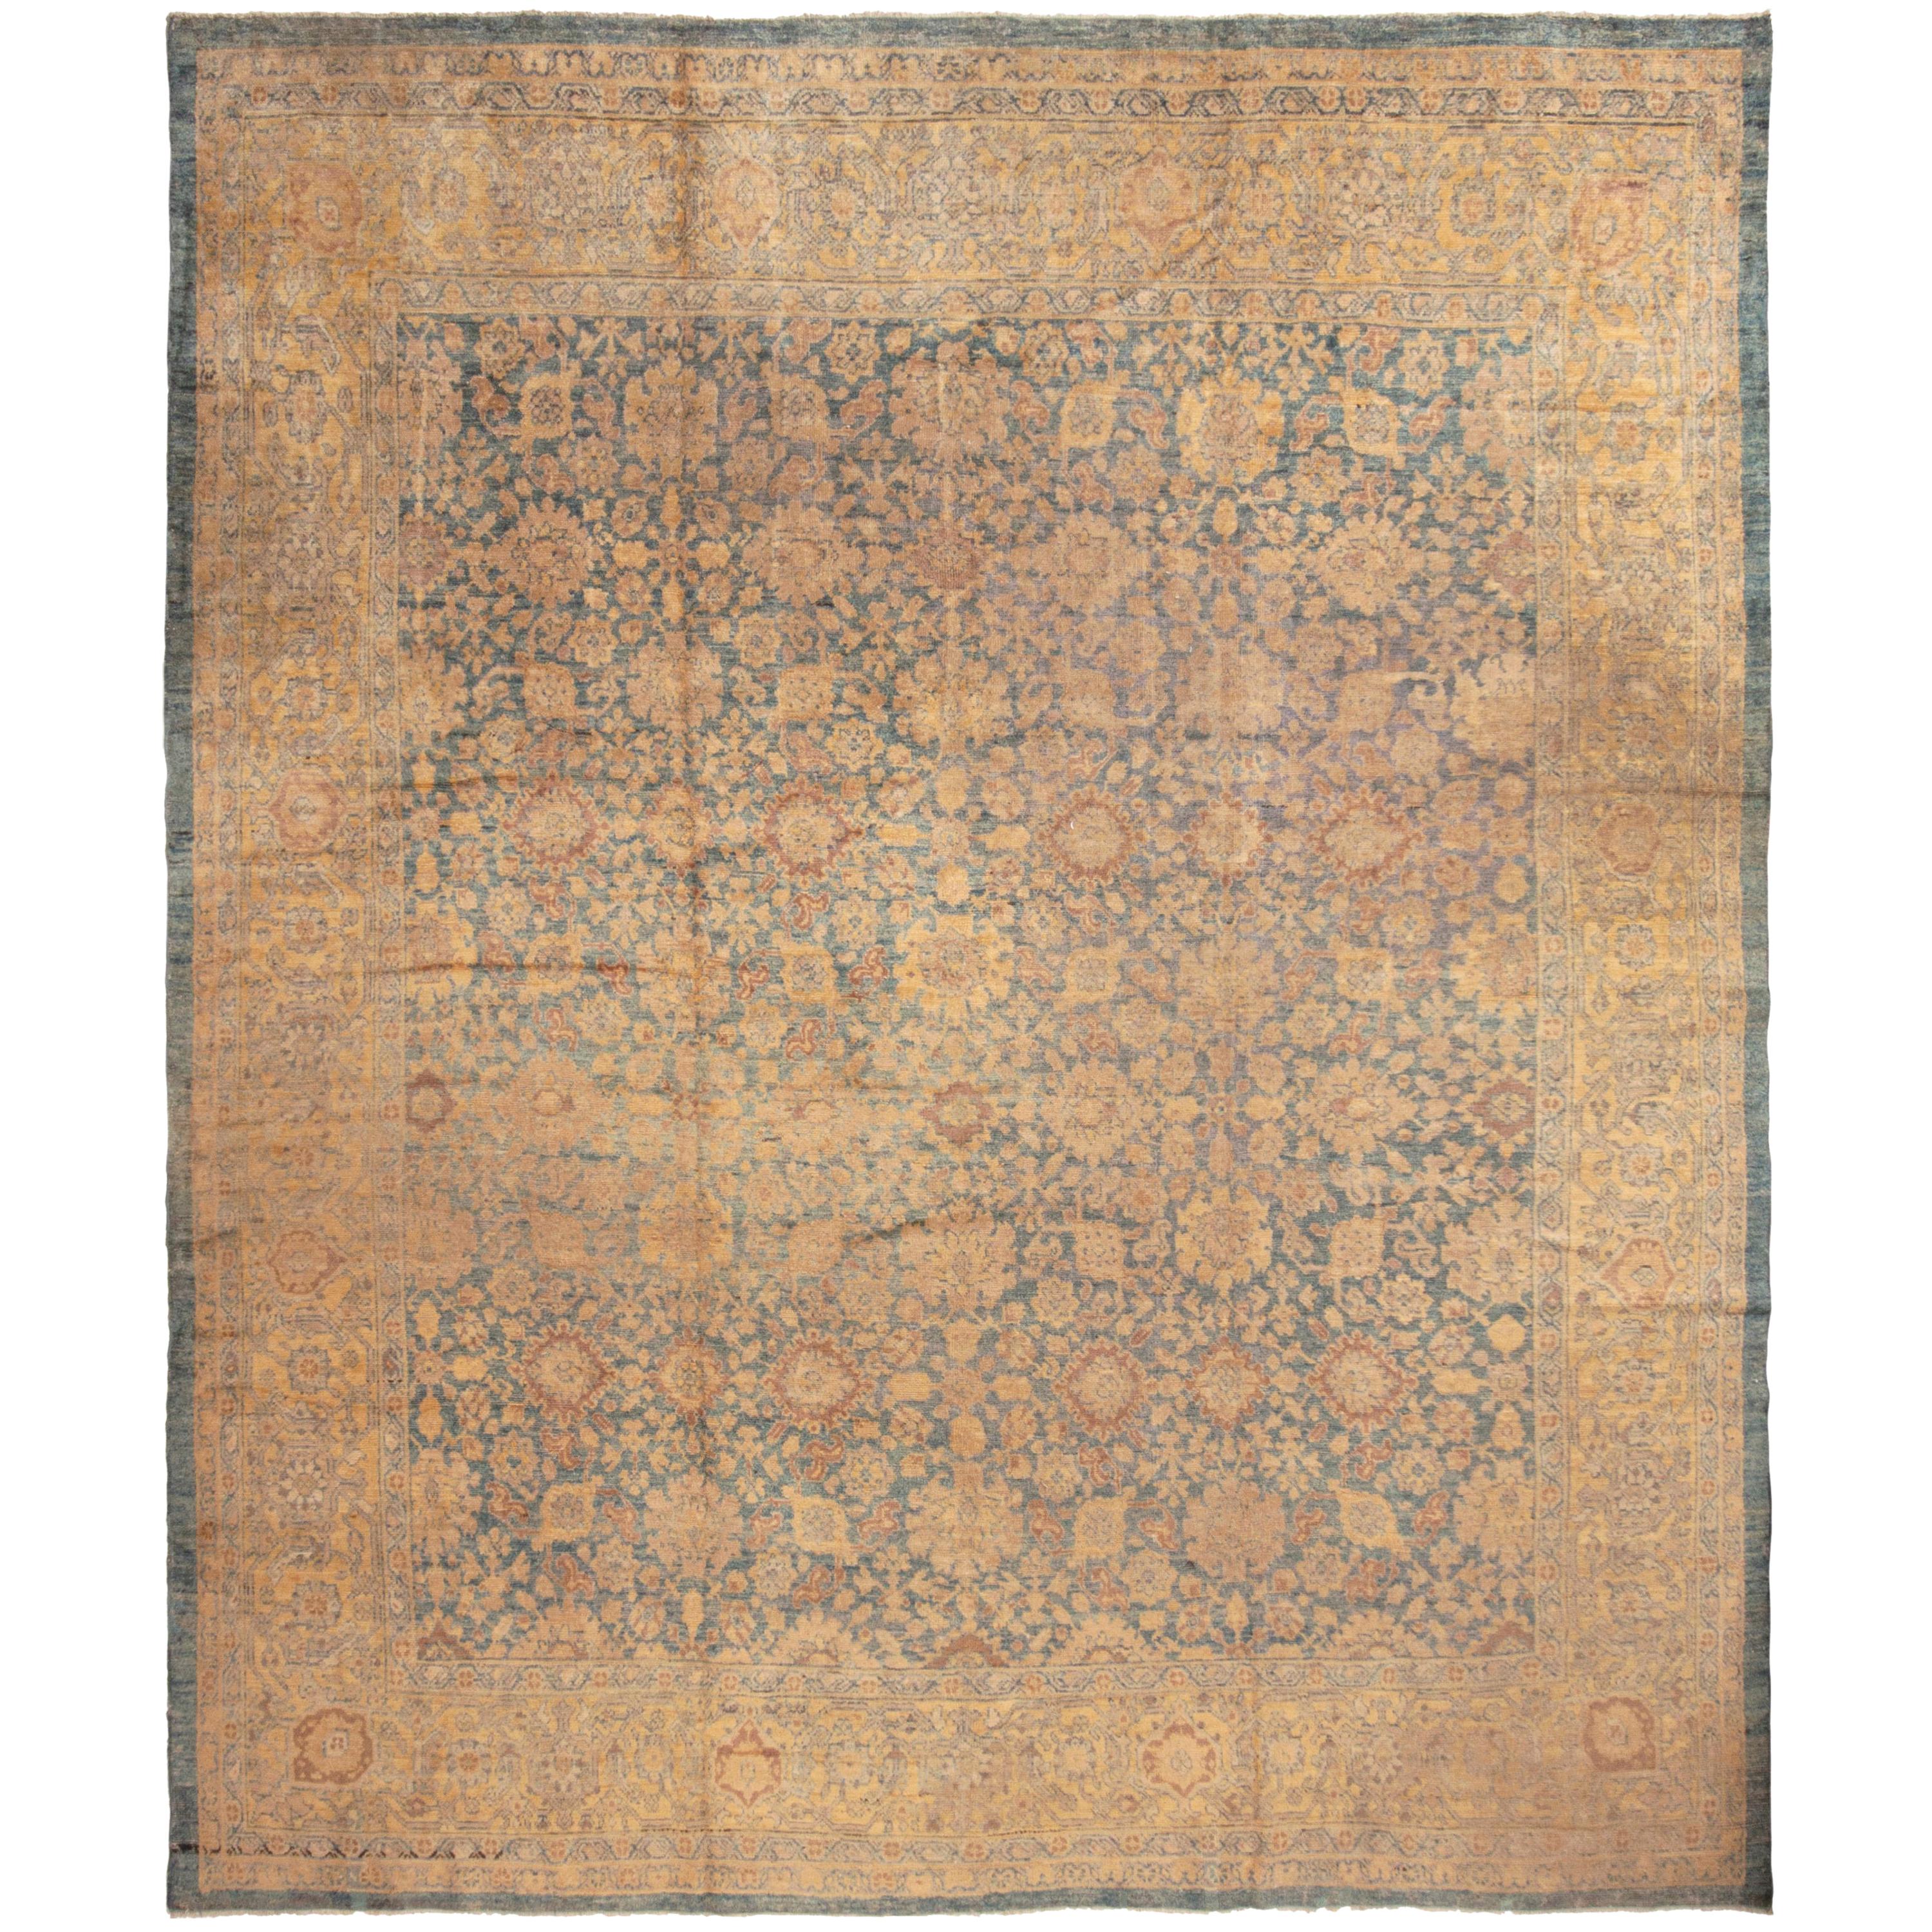 Antique Sultanabad Blue and Yellow Wool Rug with All-Over Floral Pattern